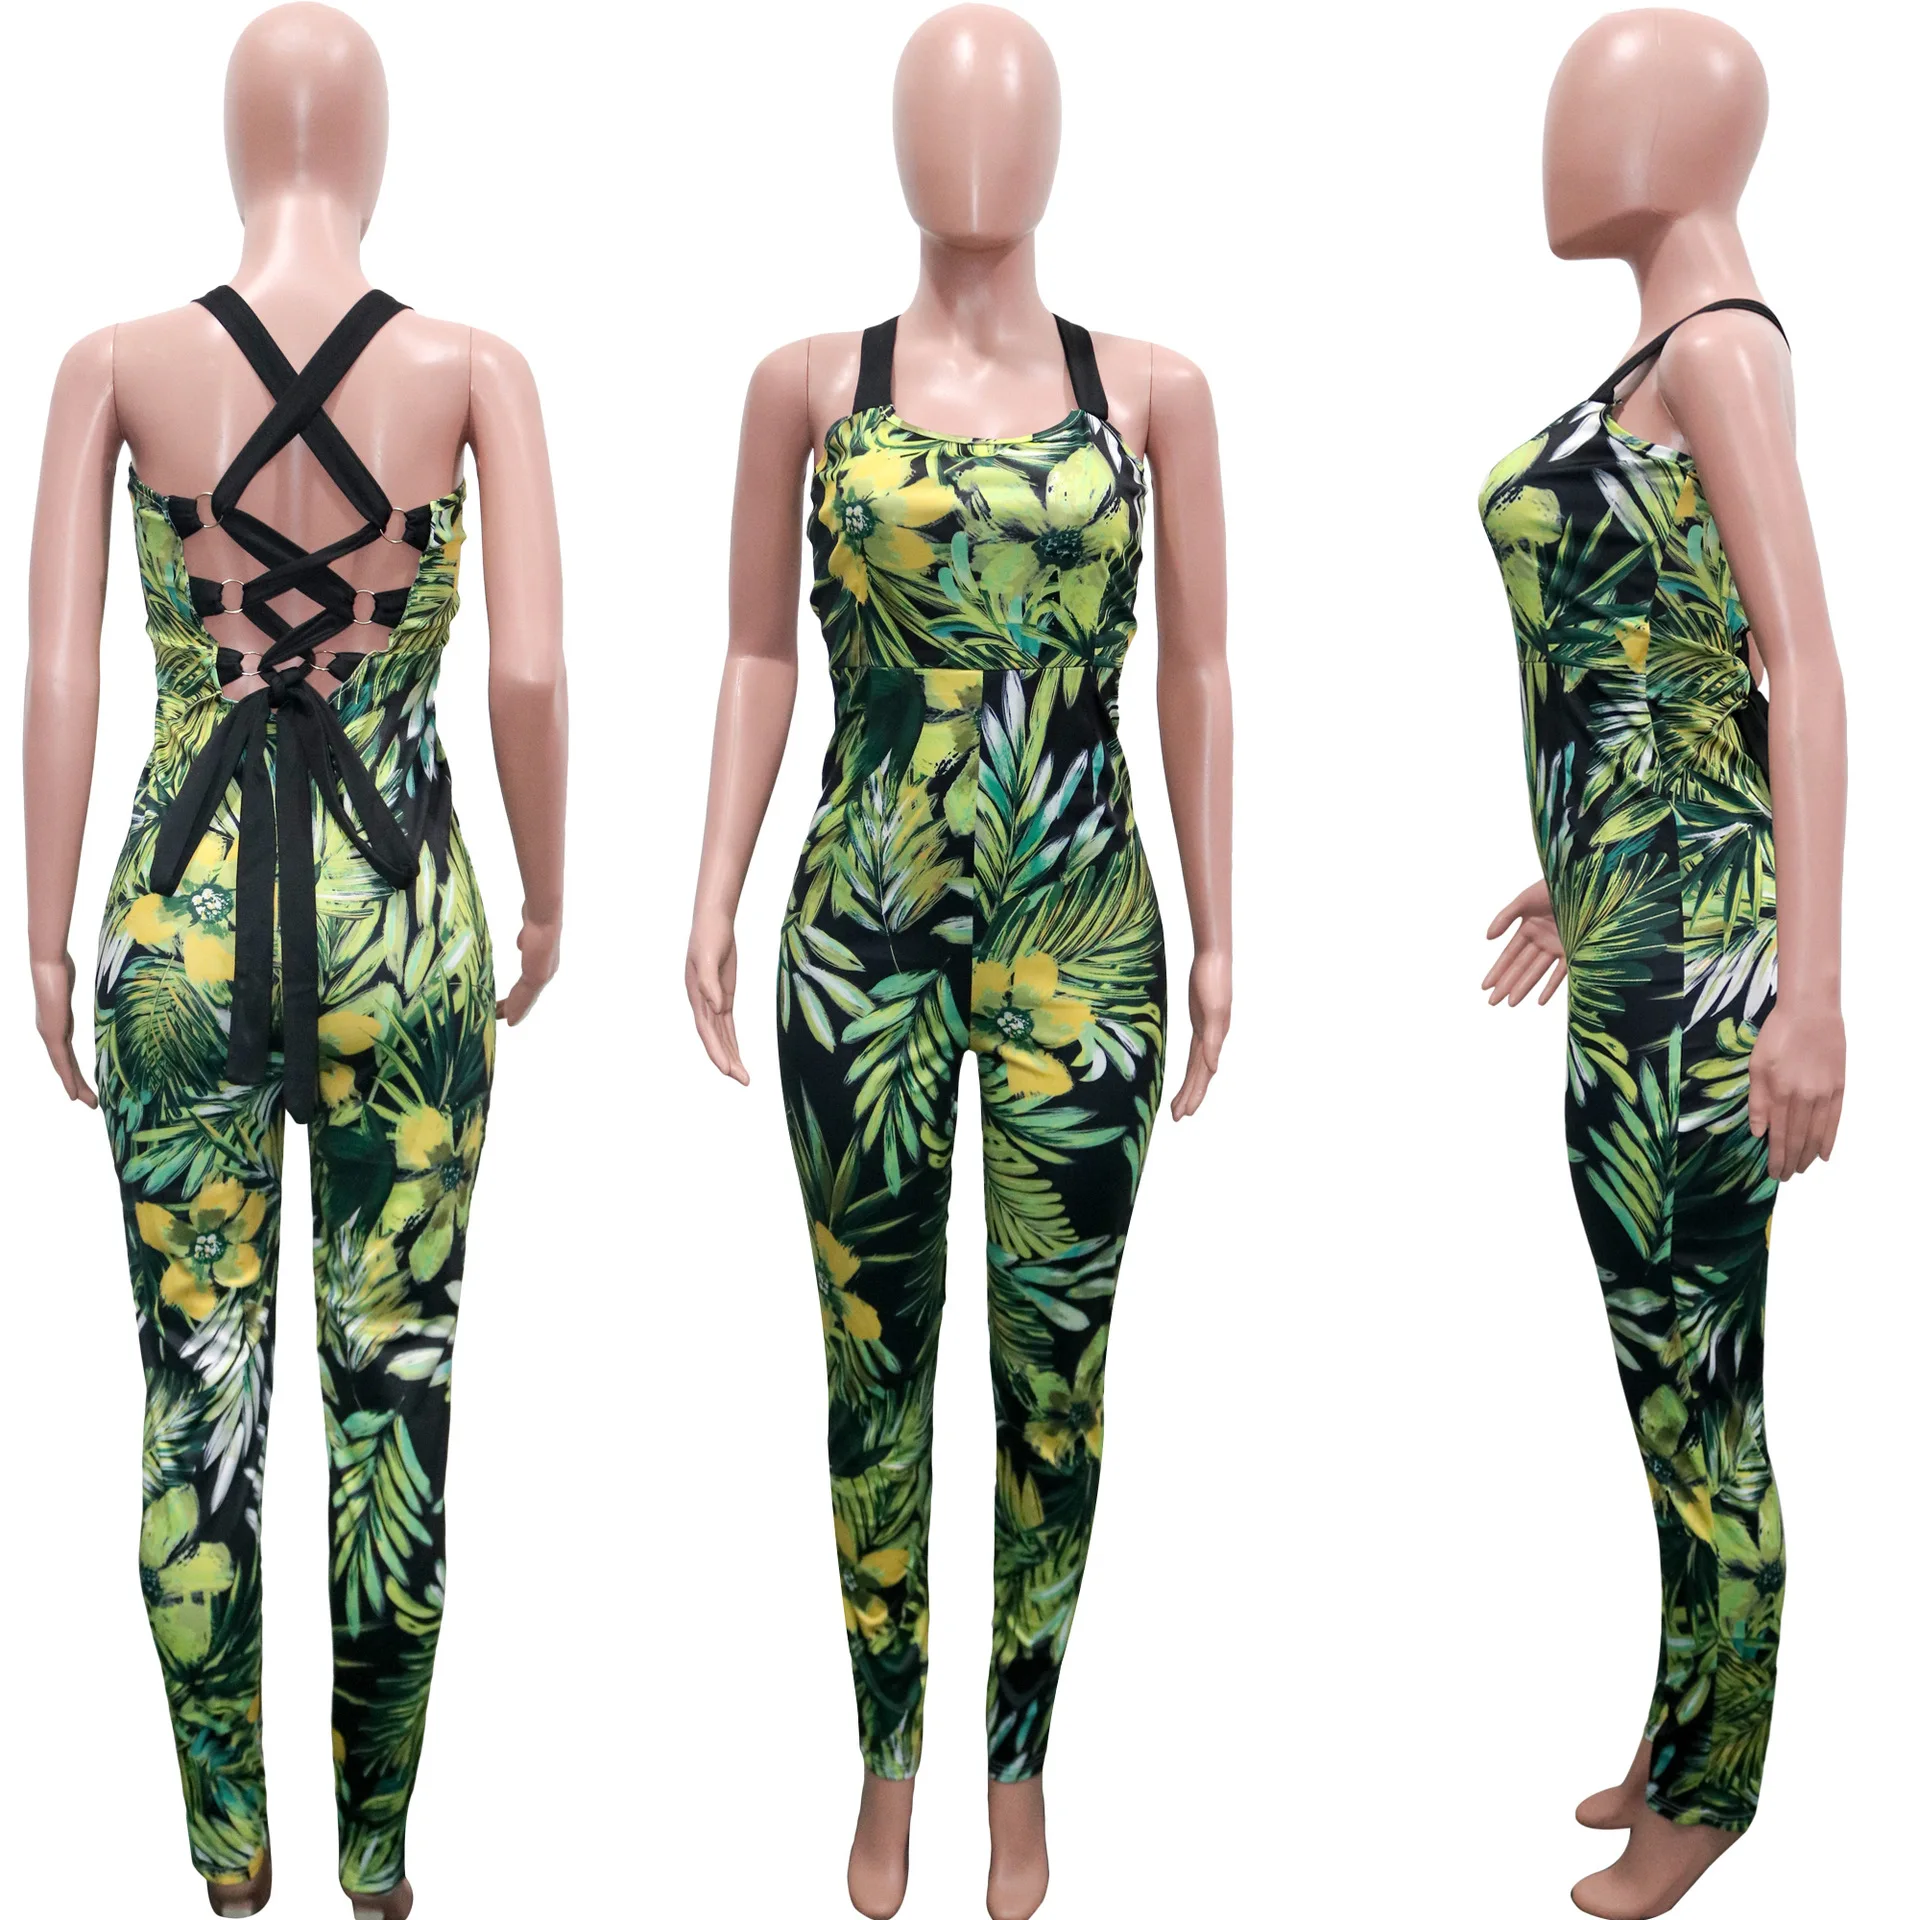 

Echoine Lace Up Grommet Jumpsuit Women Sexy Backless Bodysuit Floral Print Skinny Playsuit Party Club Outfits Overalls Summer